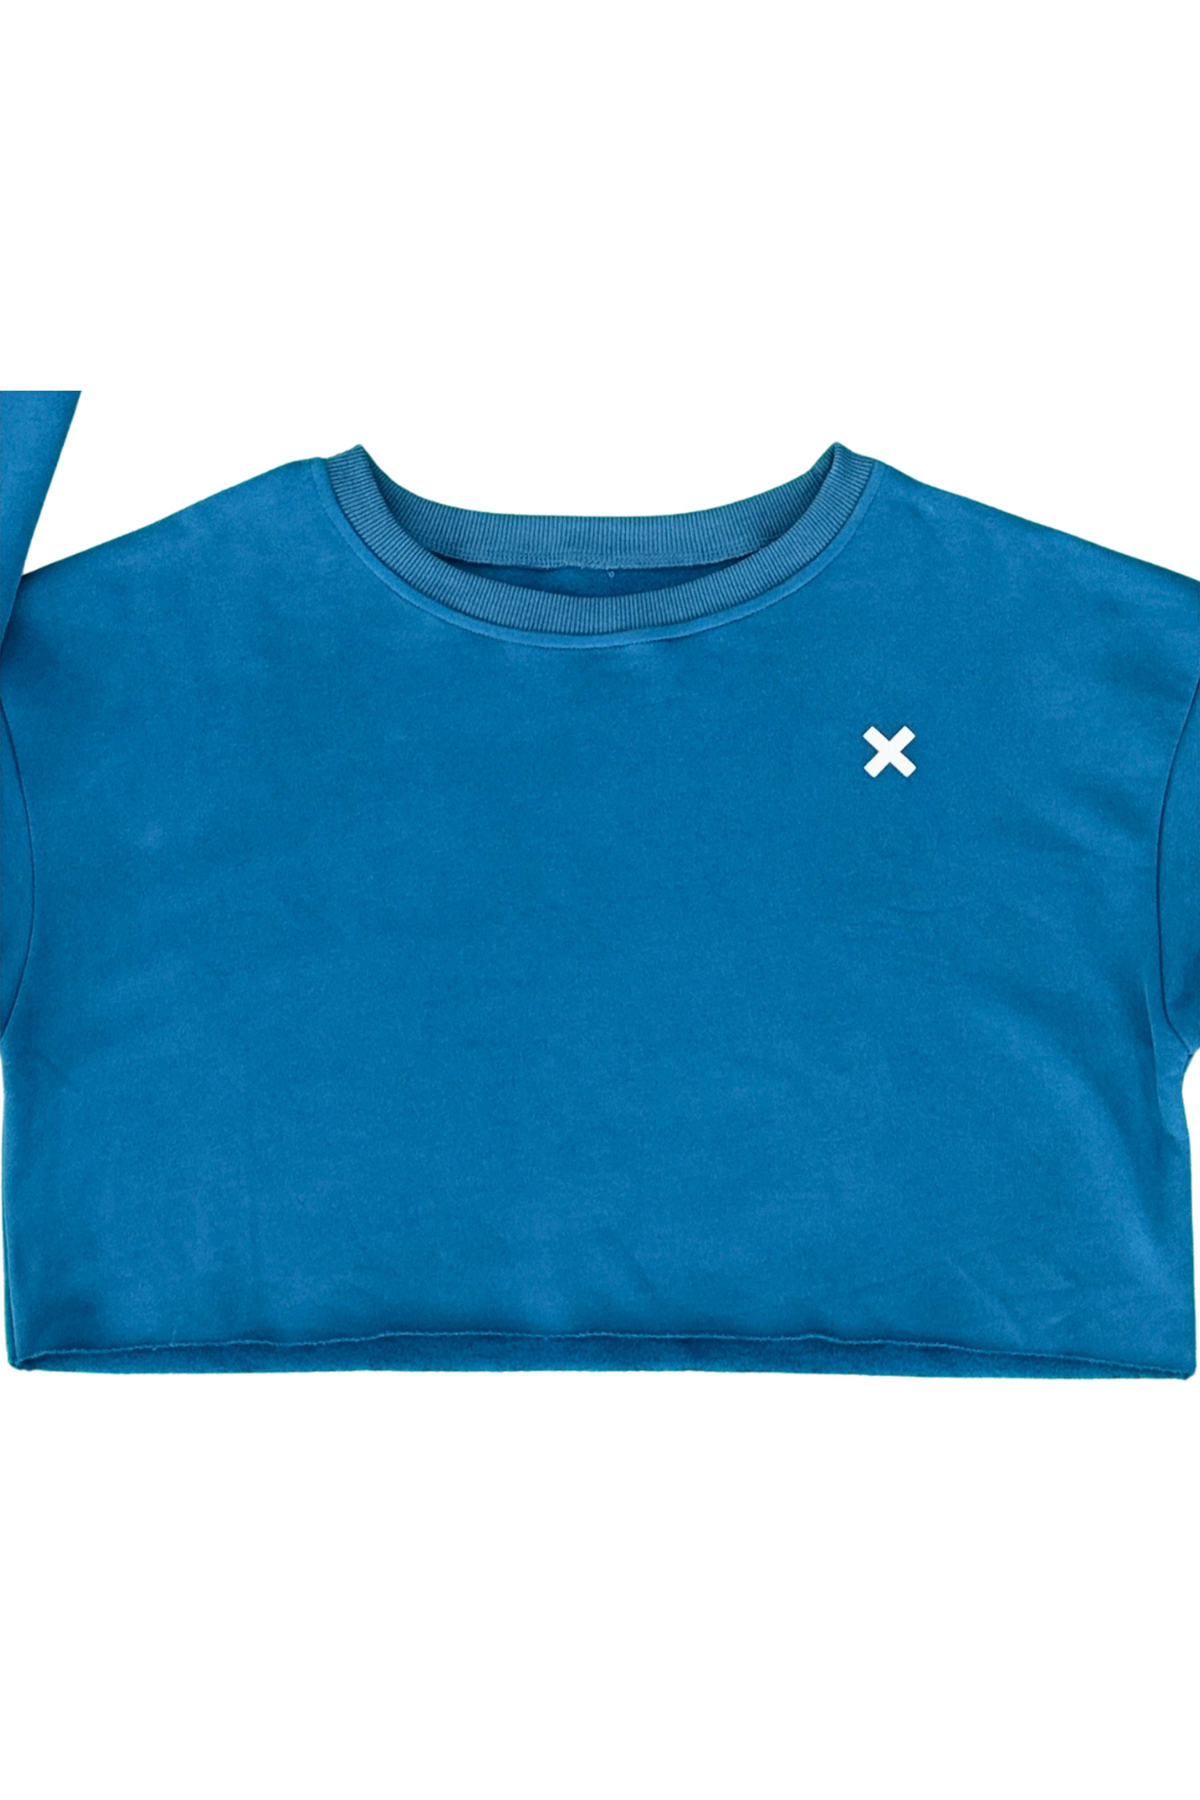 Time-Out-X-Cropped-Workout-Sweatshirt-blue-front-close